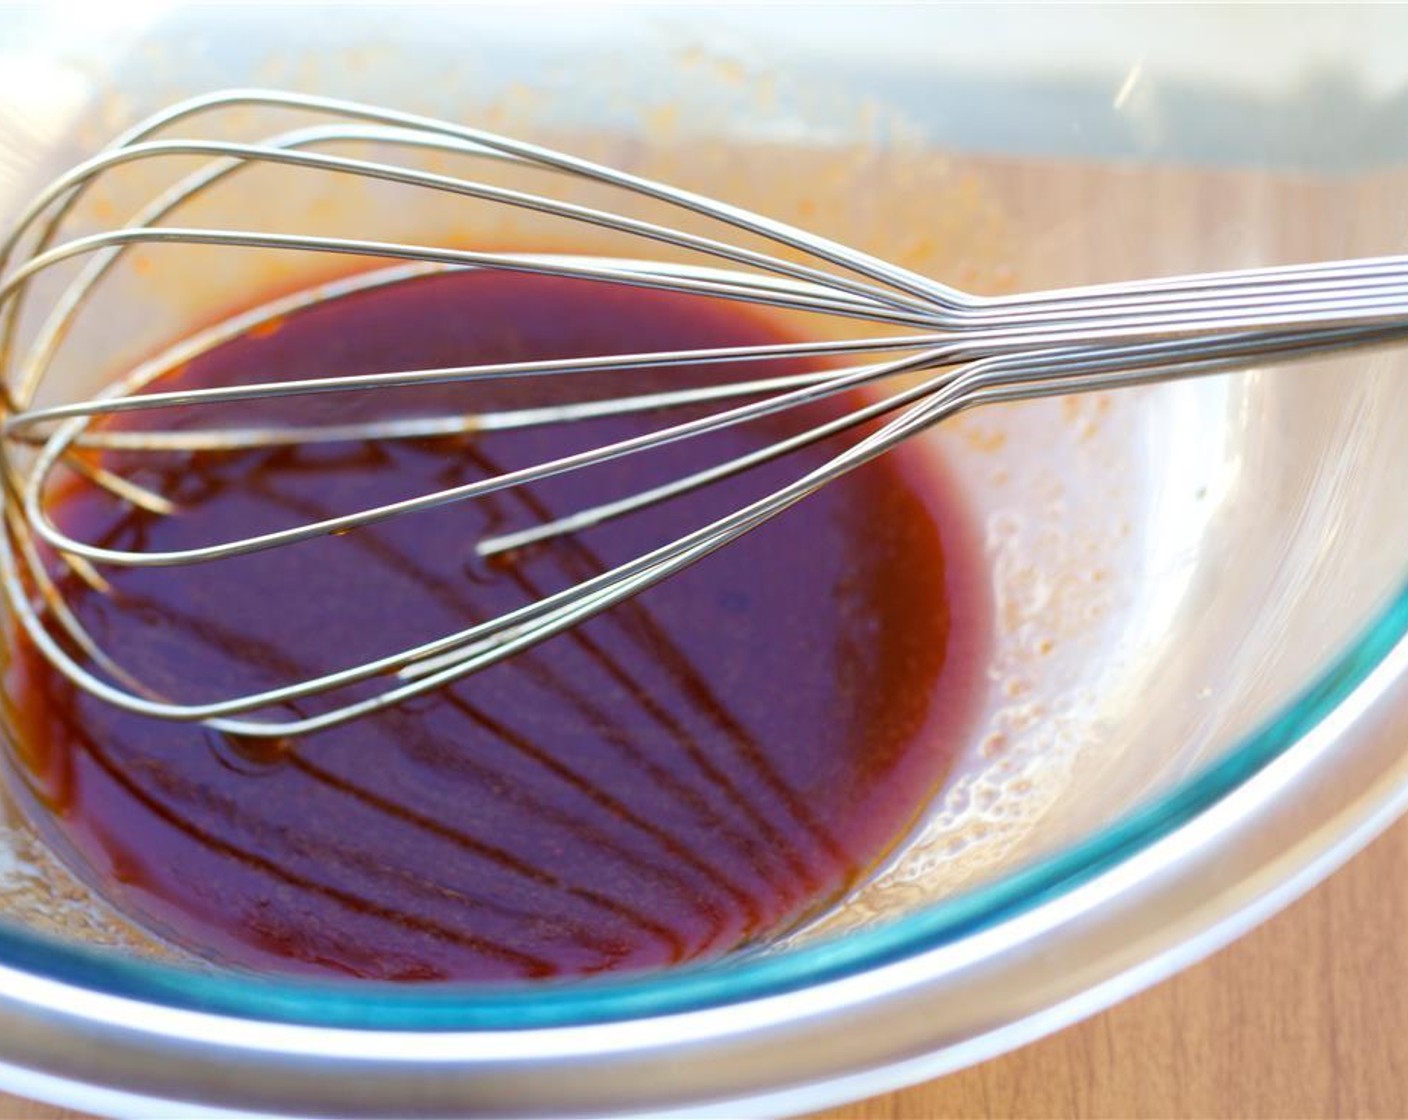 step 2 In a large bowl, whisk together the Sriracha (1/2 Tbsp), Sesame Oil (1/2 Tbsp), and Soy Sauce (2 Tbsp).